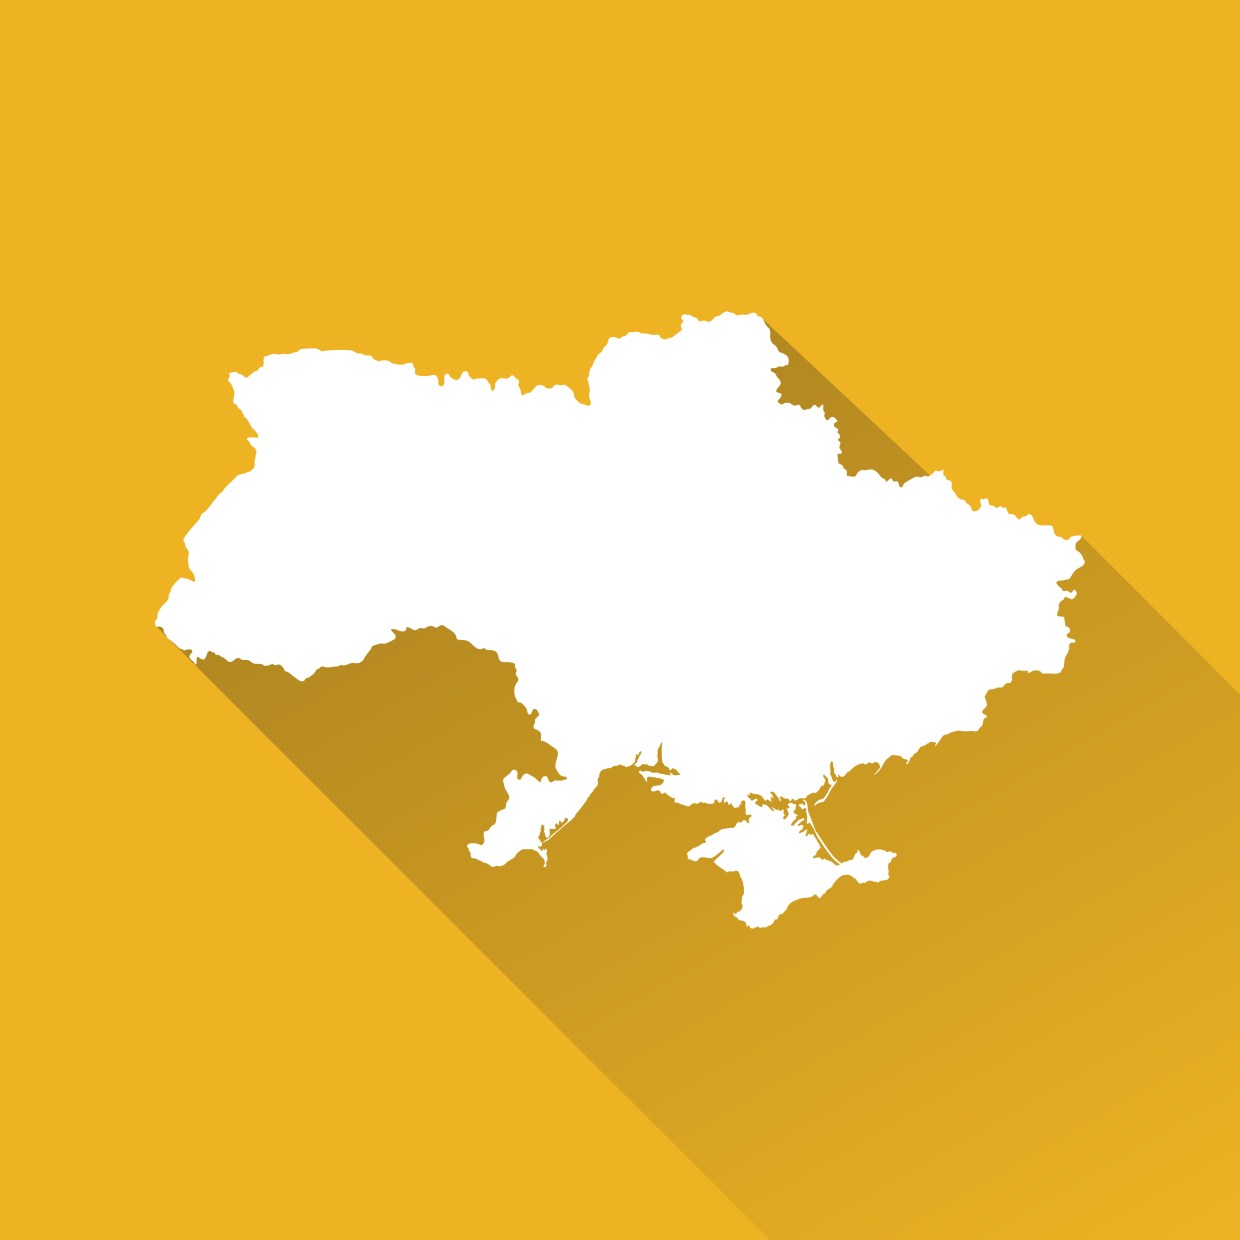 Highly detailed Ukraine map with borders isolated on background. Flat style